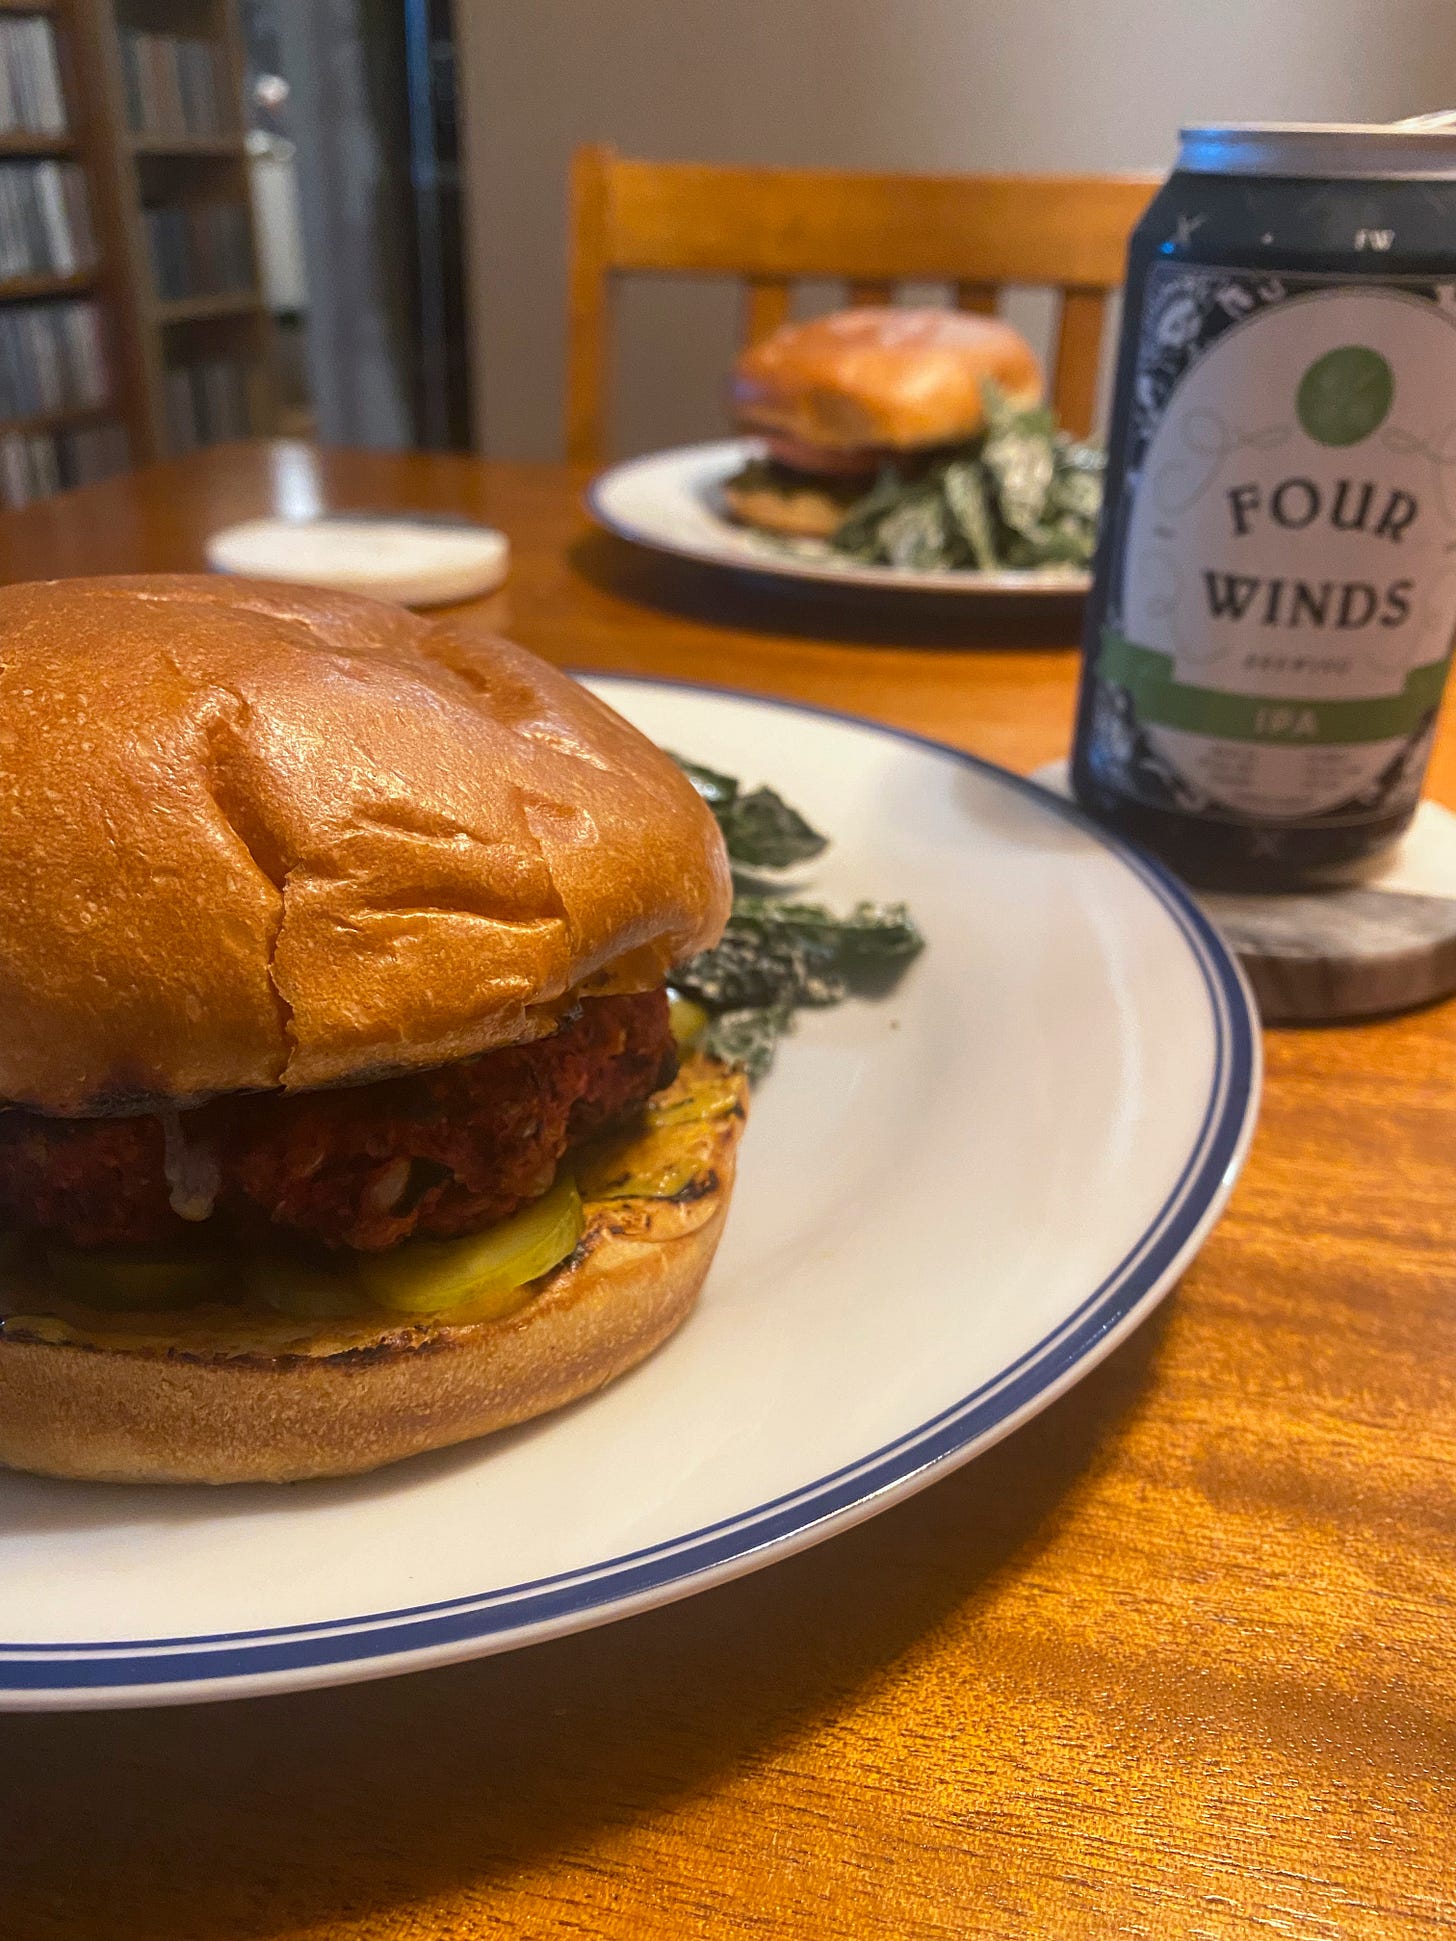 A veggie burger on a brioche bun sits on a white plate. Another plate with a burger and salad on it is in the background, and on a coaster next to the first plate is a can of Four Winds IPA.